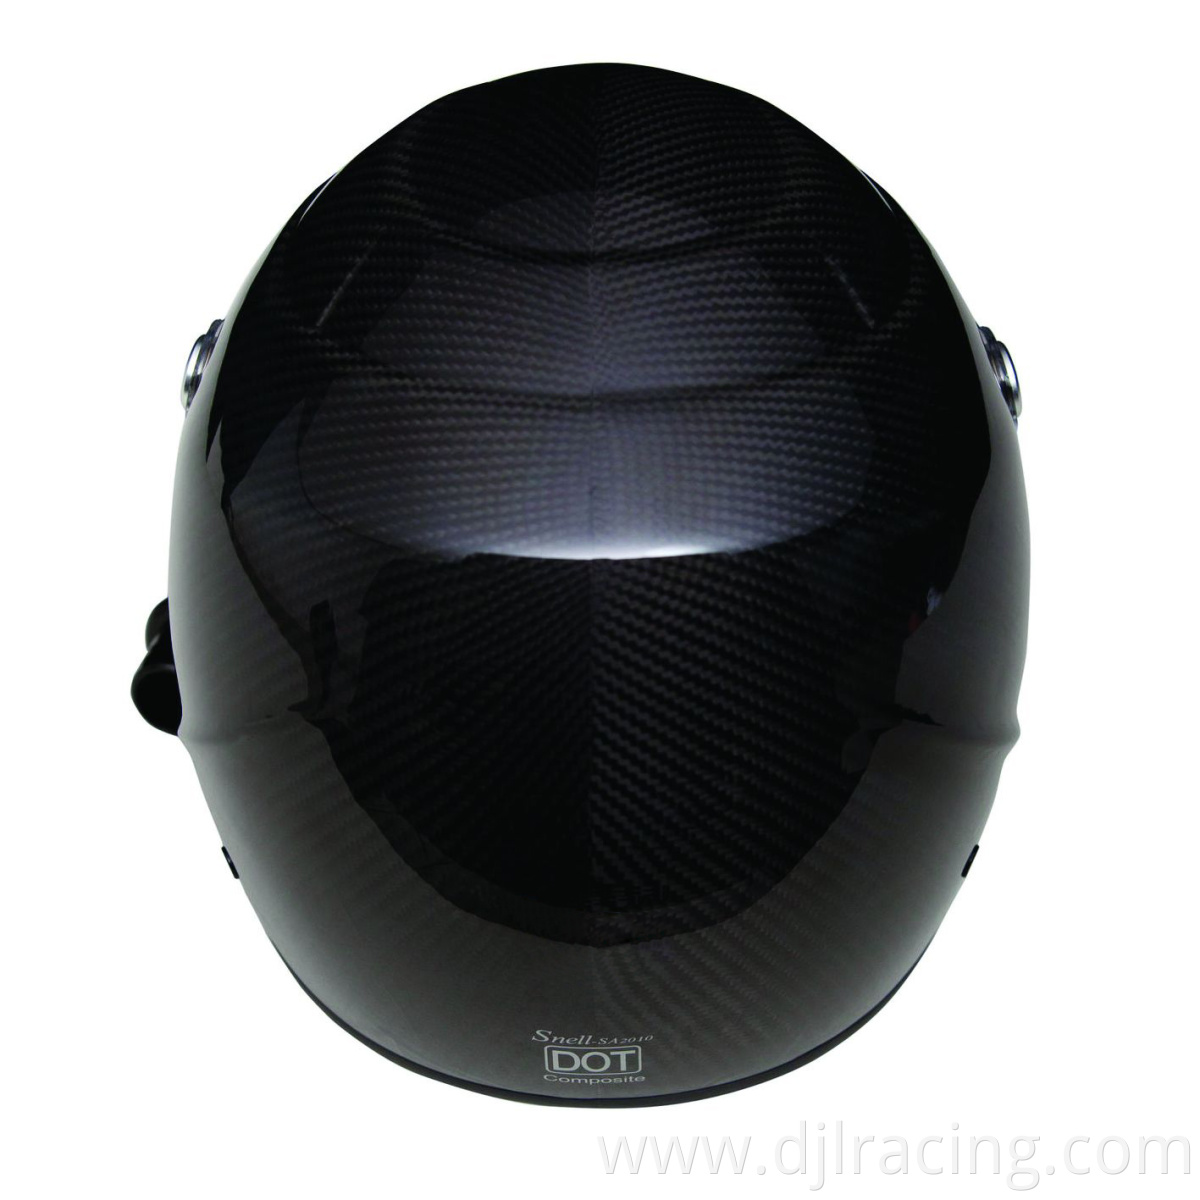 Wholesale China Trade safety helmet / motorcycle accessories motorcycle racing helmets BF1-760 (Carbon Fiber)